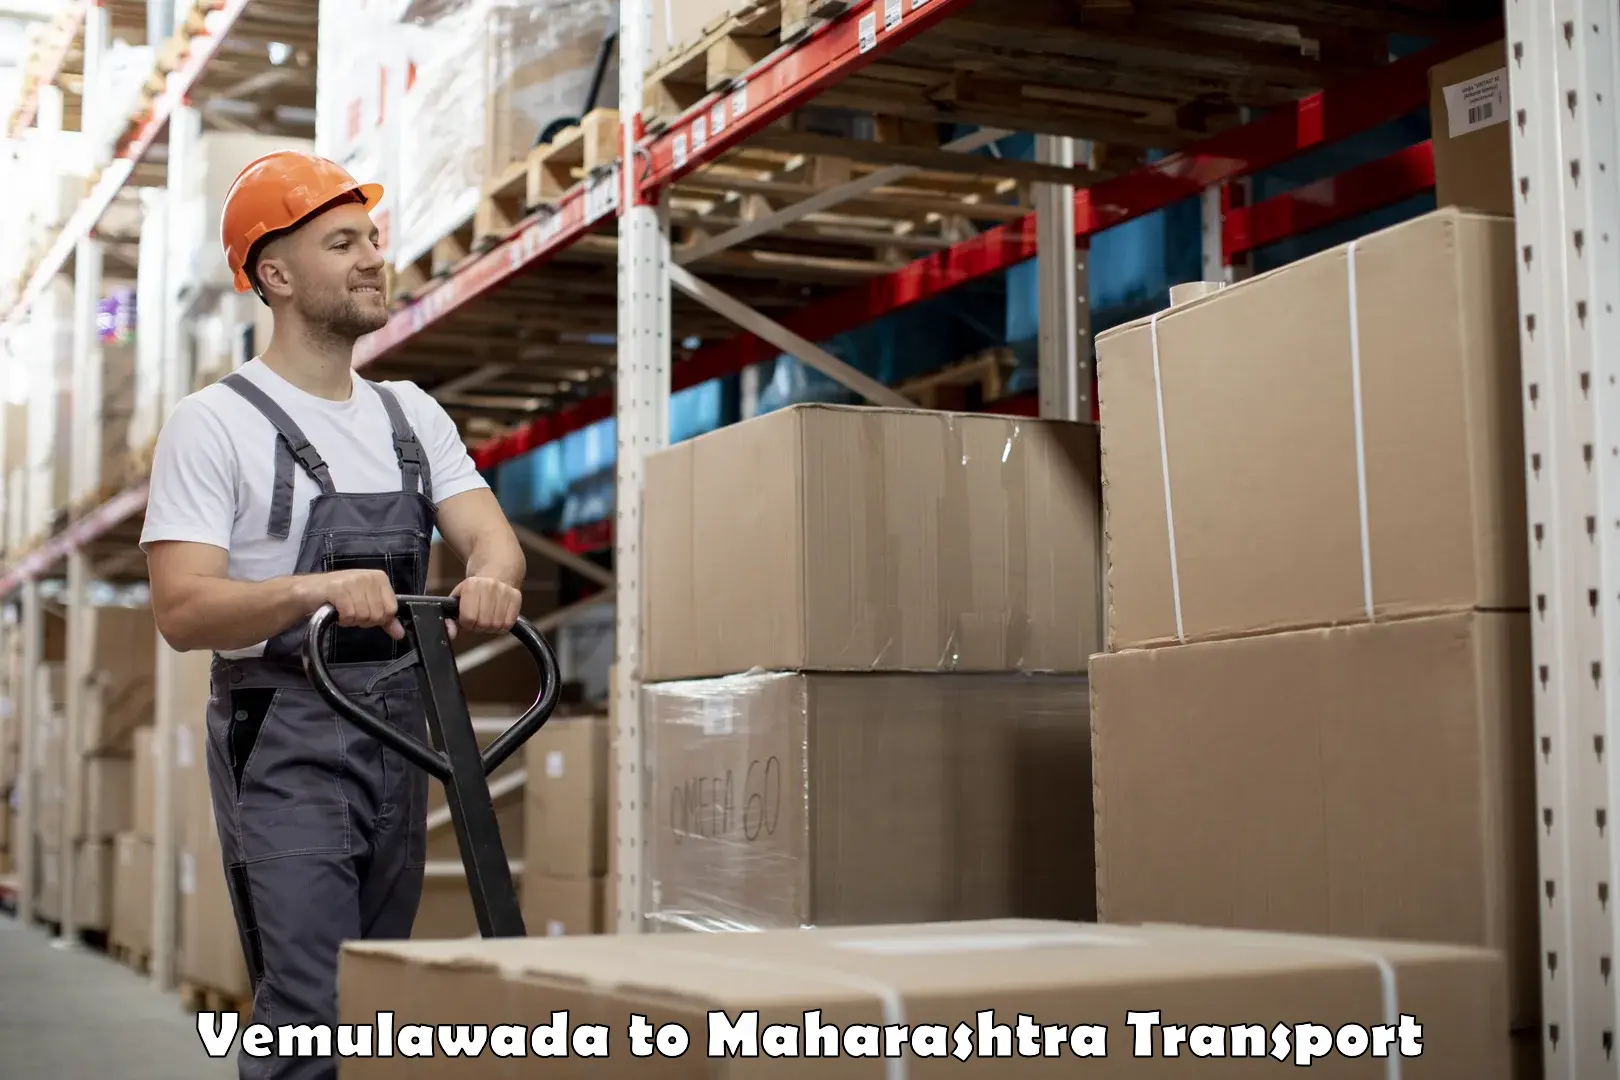 Container transport service Vemulawada to Sindhudurg